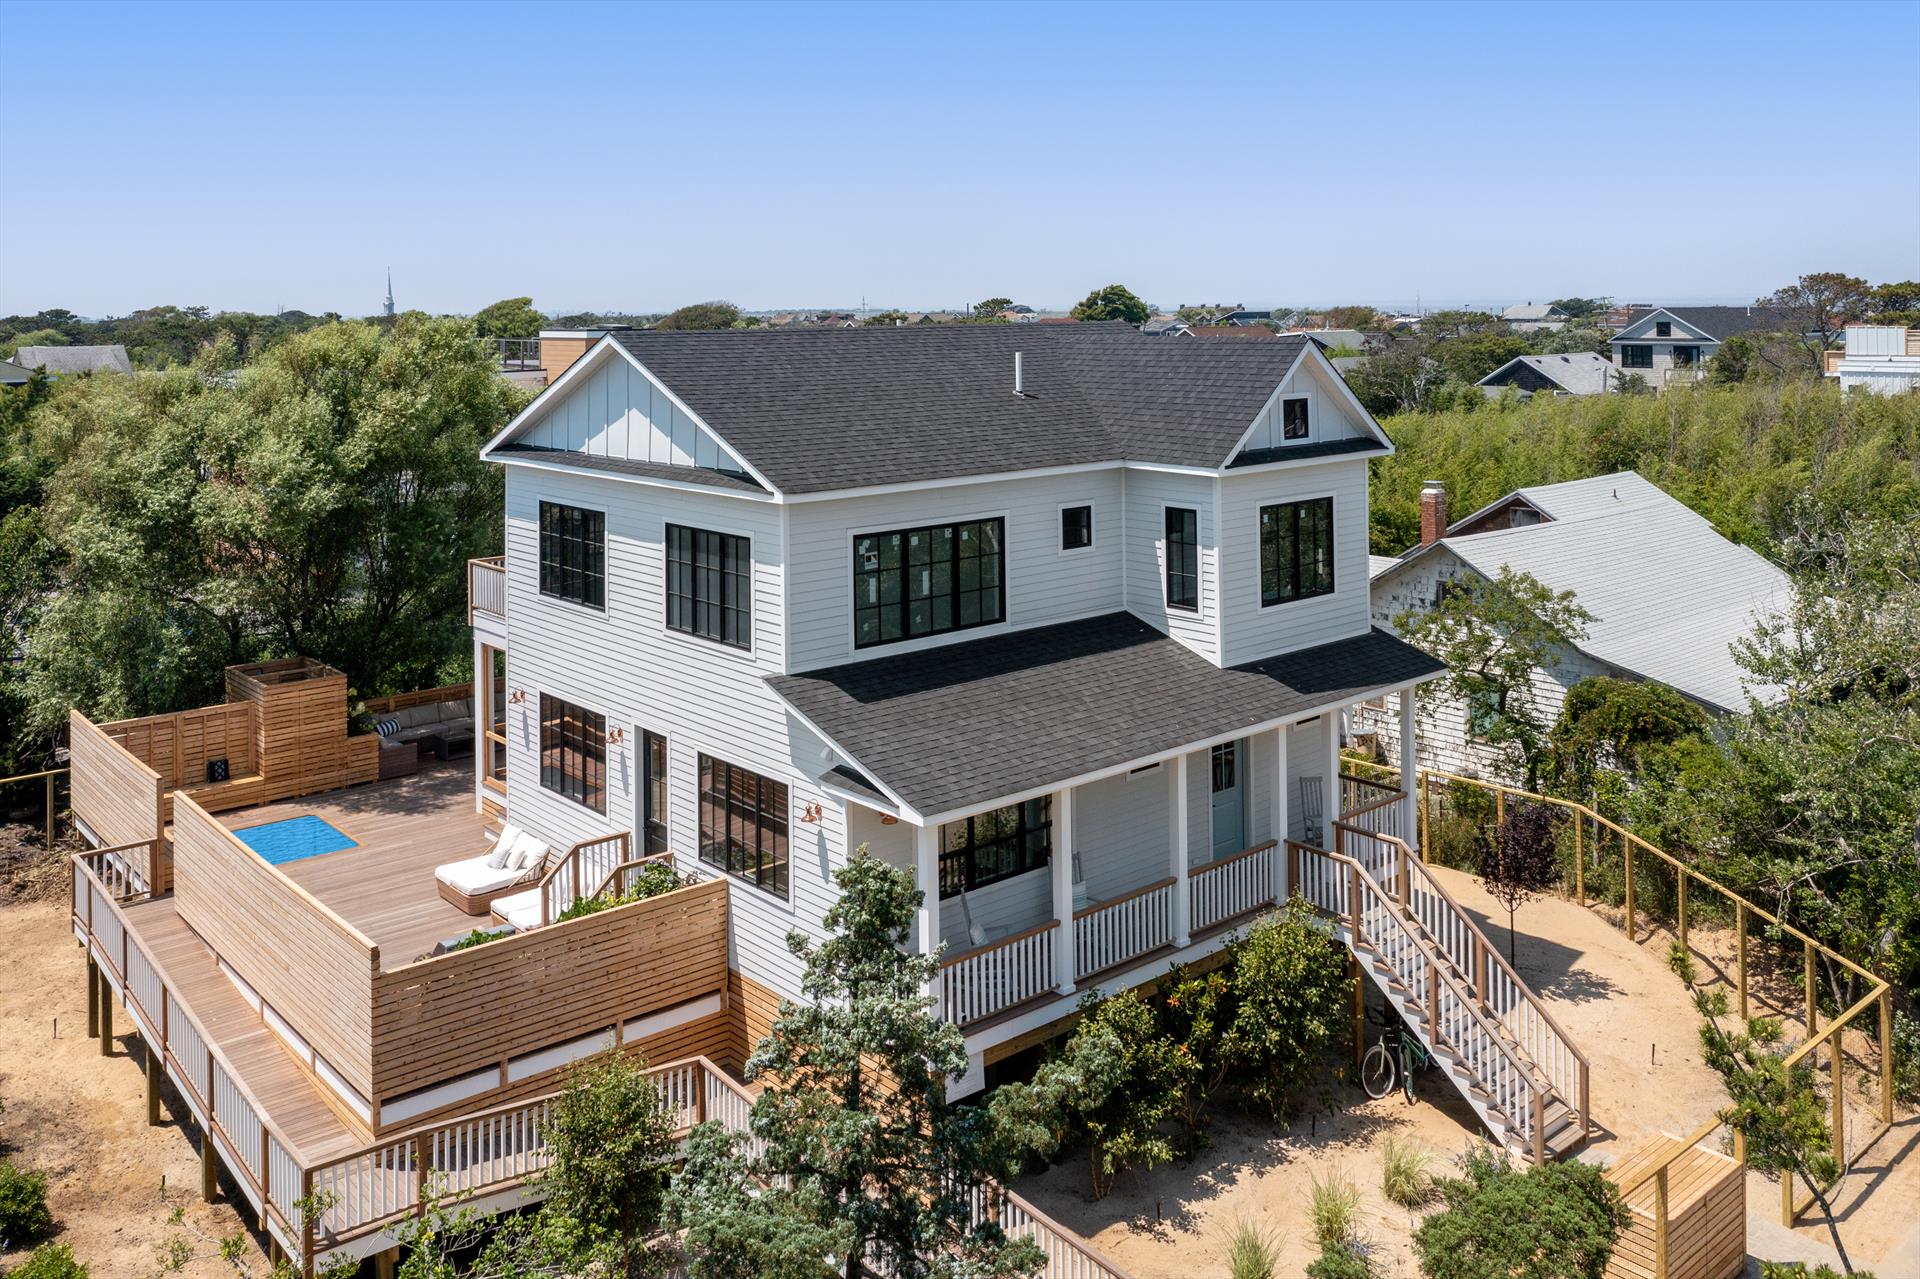 Beautiful new construction home in Seaview, just a 2 minute walk to the beach! This gorgeous new home on an oversized 84’ X 100 lot has it all! Relax in the large open great room with a double height living room and an oversized sliding door leading out to the screened in porch. Chef’s kitchen is beautifully appointed with a Wolf range, 33” wide all-refrigerator and all-freezer columns, walk in pantry, and a 10’ island with room for the whole family to gather around. The home’s 4 bedrooms all feature private en-suite bathrooms. The massive wraparound mahogany deck is nearly 1,000 SF, offering plenty of space to lounge and entertain. Take a dip in the plunge pool to cool down on hot days or grill up a feast at the outdoor kitchen with built in grill. The fabulous main floor primary suite features a walk in closet, and private bathroom with dual sinks, a make up vanity area, and a private water closet. A powder bathroom and laundry/mud room round out the first floor. The second floor features 3 additional bedroom suites, 11’ ceilings, a second laundry room, and a spacious terrace. Ideally located in the highly desirable Seaview community, this home sits in a tranquil location just just 500' from the beach, and also a short walk to the shops and restaurants of downtown Ocean Beach. Enjoy Seaview amenities including clay tennis courts, softball field, playground, children's pool, and lifeguarded bay & ocean beaches.
<br>
<br> Available July 8th - 24th
<br> $13,500/week